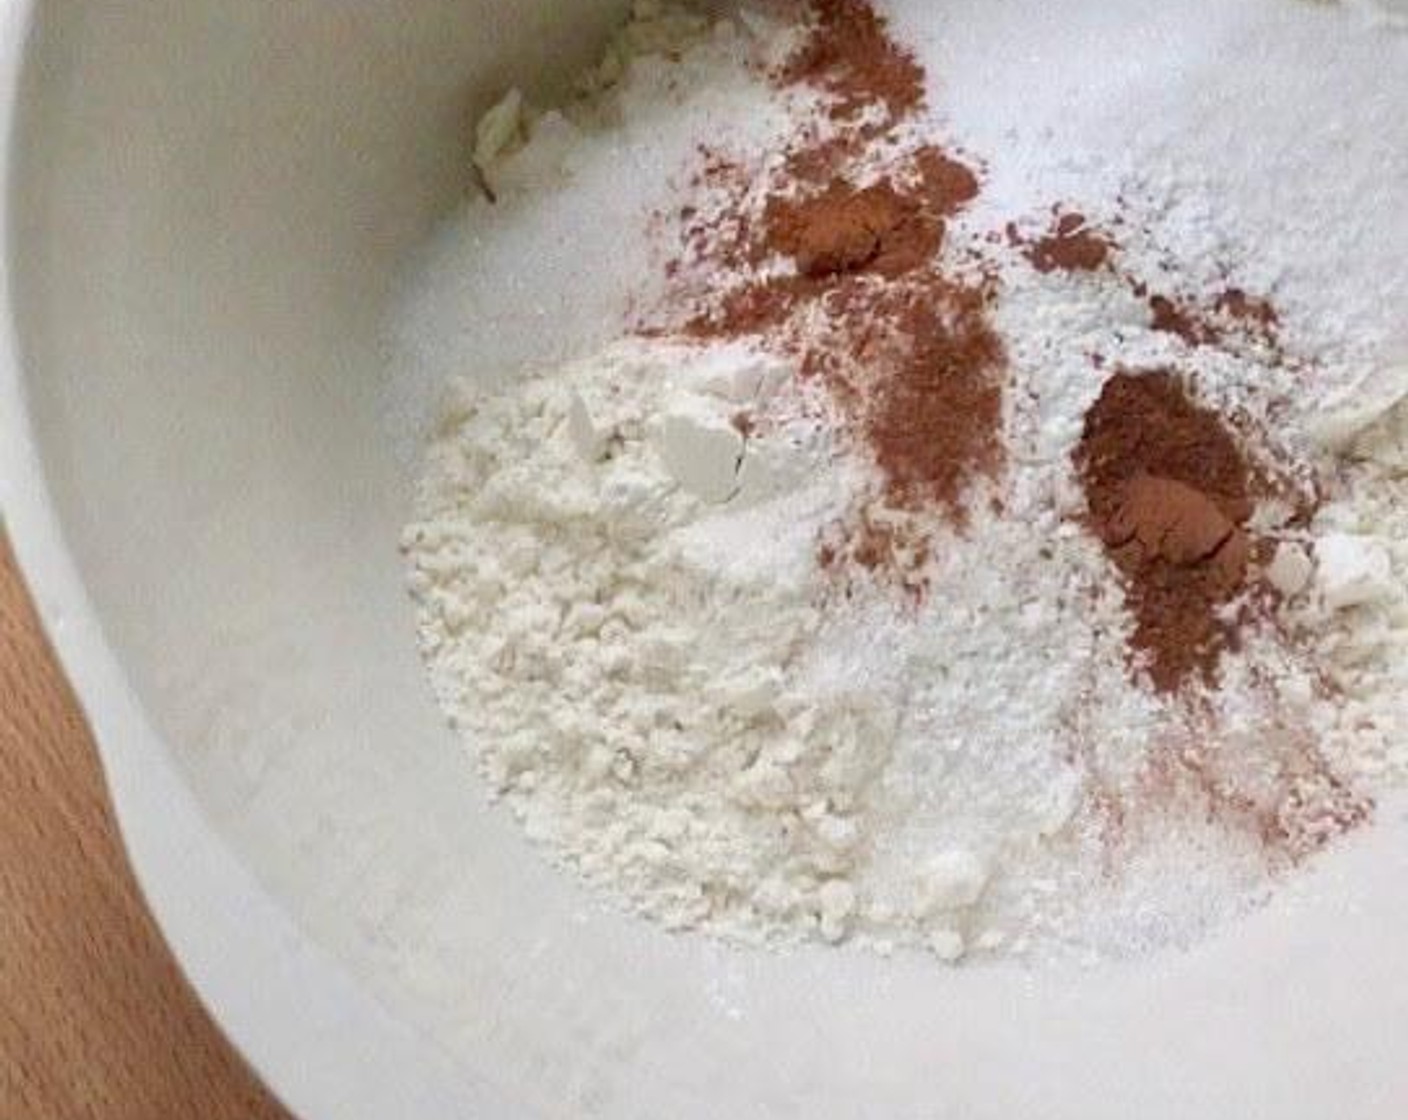 step 5 Combine all DRY ingredients: In a large bowl mix together All-Purpose Flour (1 1/2 cups), Granulated Sugar (1/2 cup), Baking Powder (1 Tbsp), Ground Cinnamon (1/4 tsp), Ground Nutmeg (1/4 tsp) and Salt (1/4 tsp).